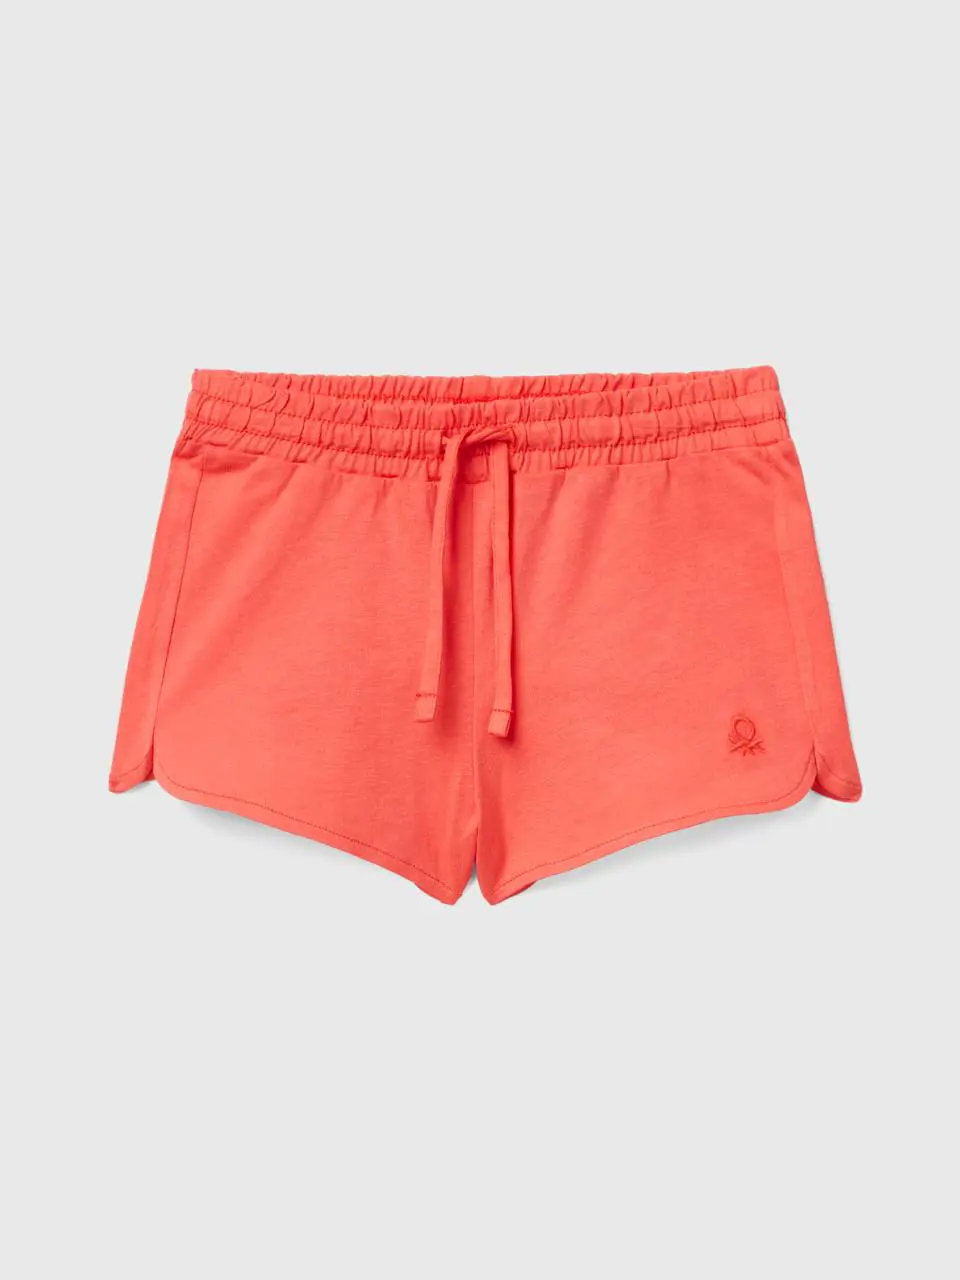 Benetton shorts with drawstring in organic cotton. 1